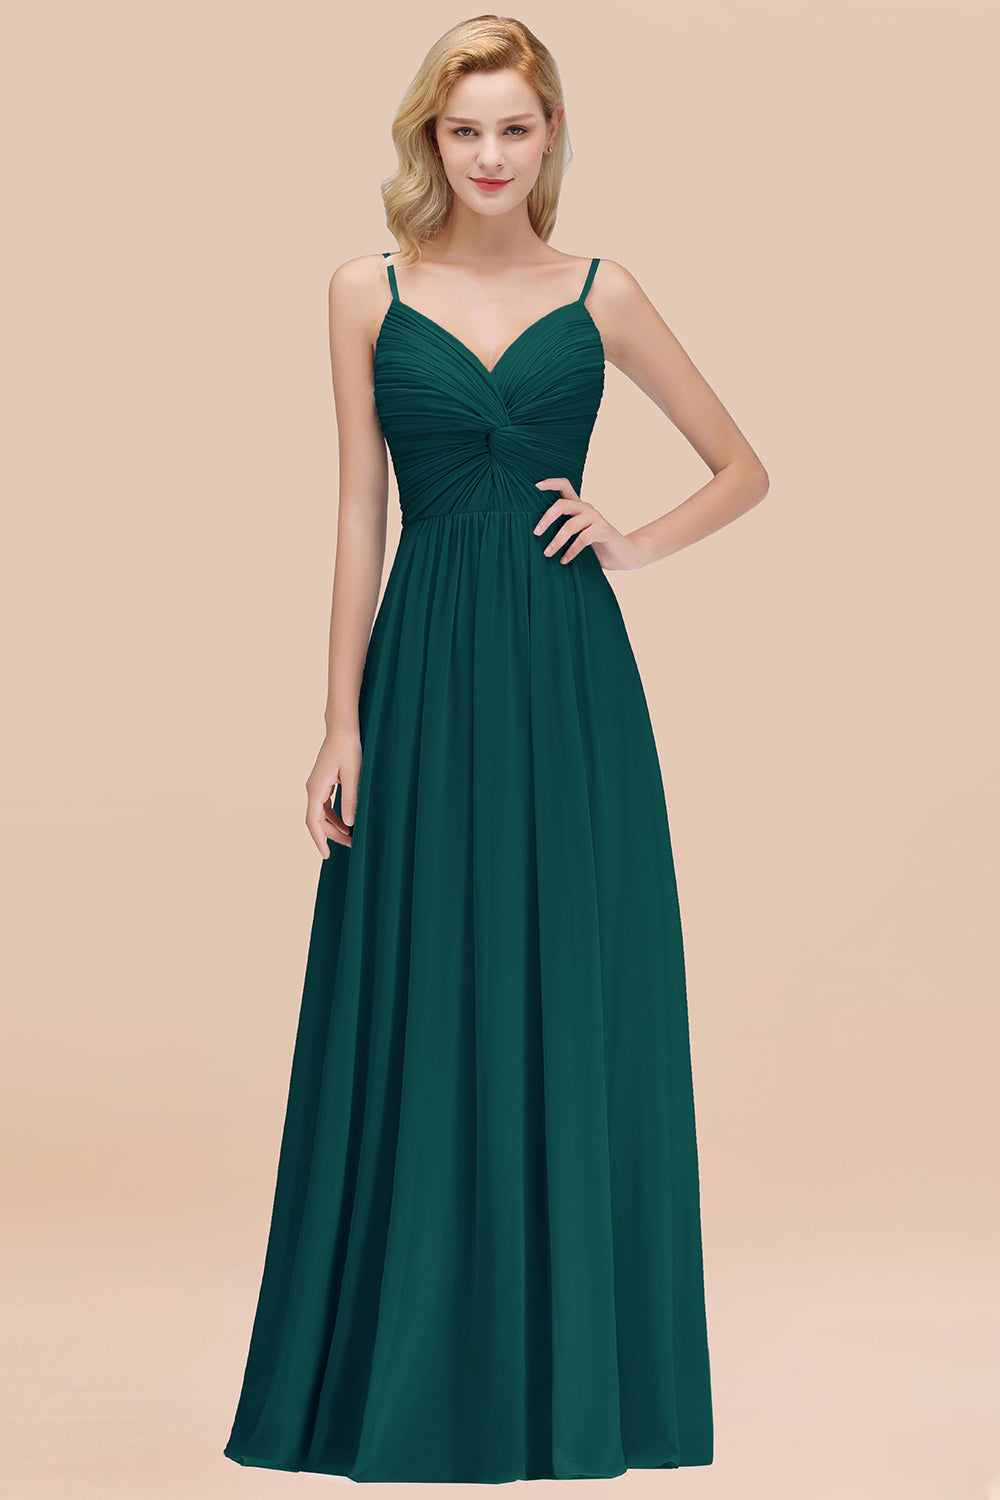 Load image into Gallery viewer, Chic V-Neck Pleated Backless Bridesmaid Dresses with Spaghetti Straps-27dress
